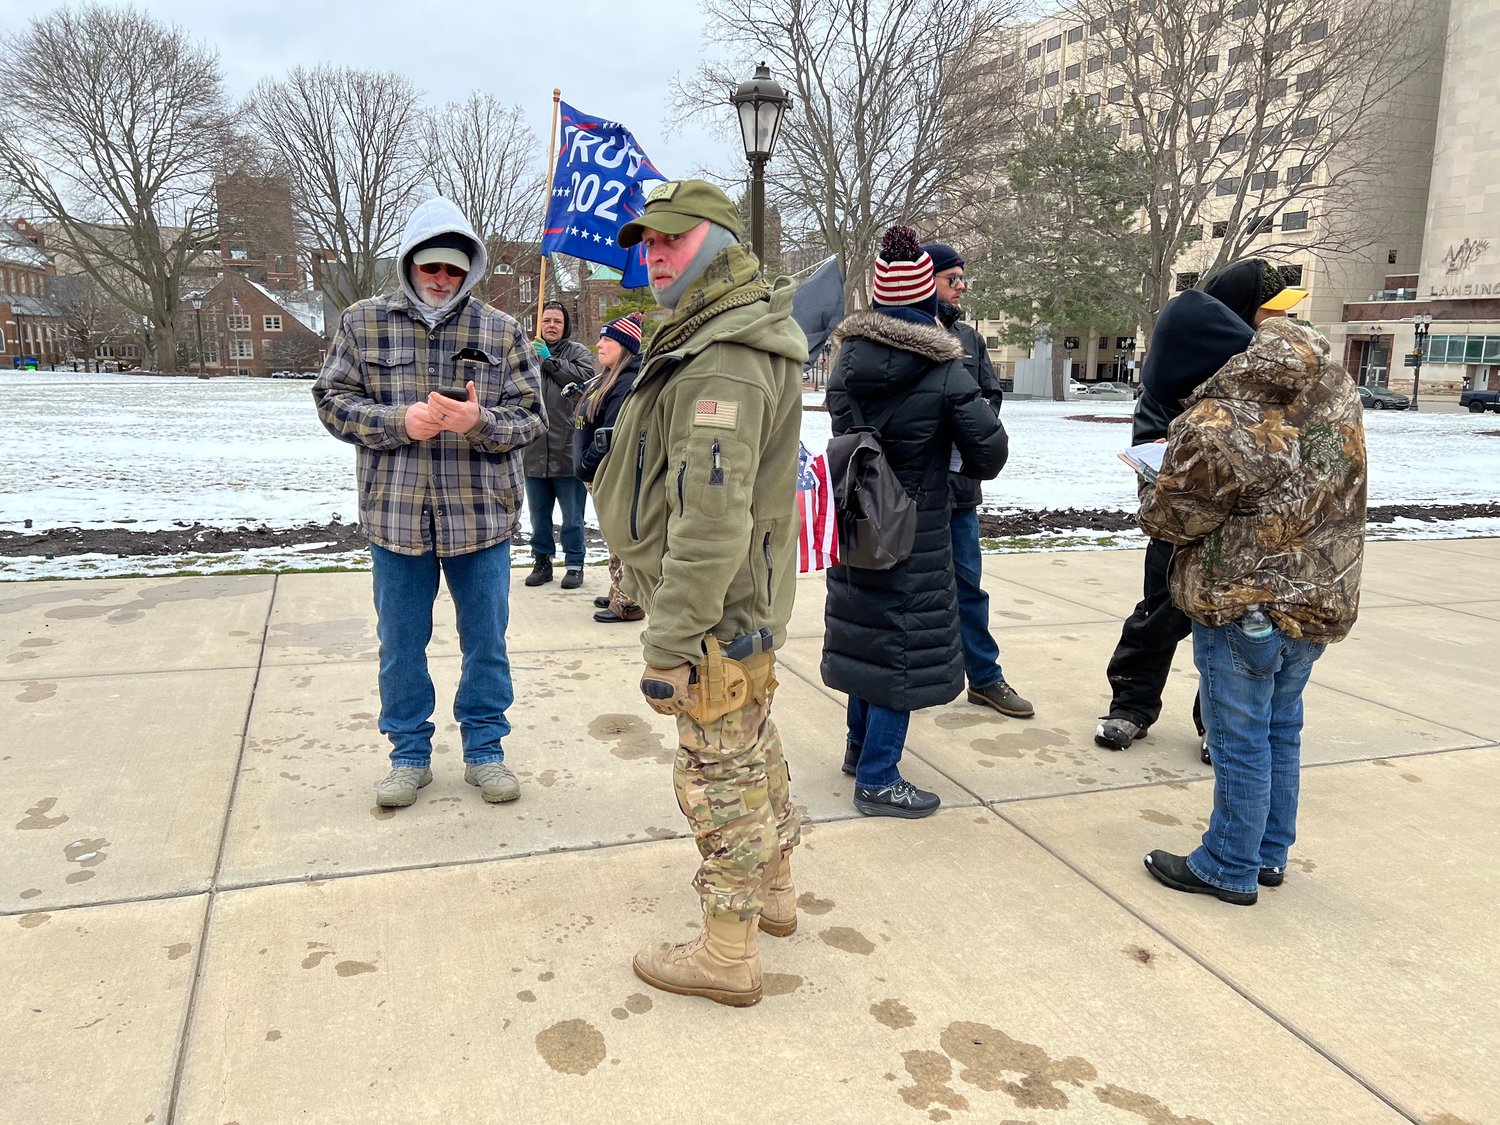 One man, pictured in the camouflage with a firearm at his side, identified himself as "head of security" at the rally and demanded this photo be deleted.